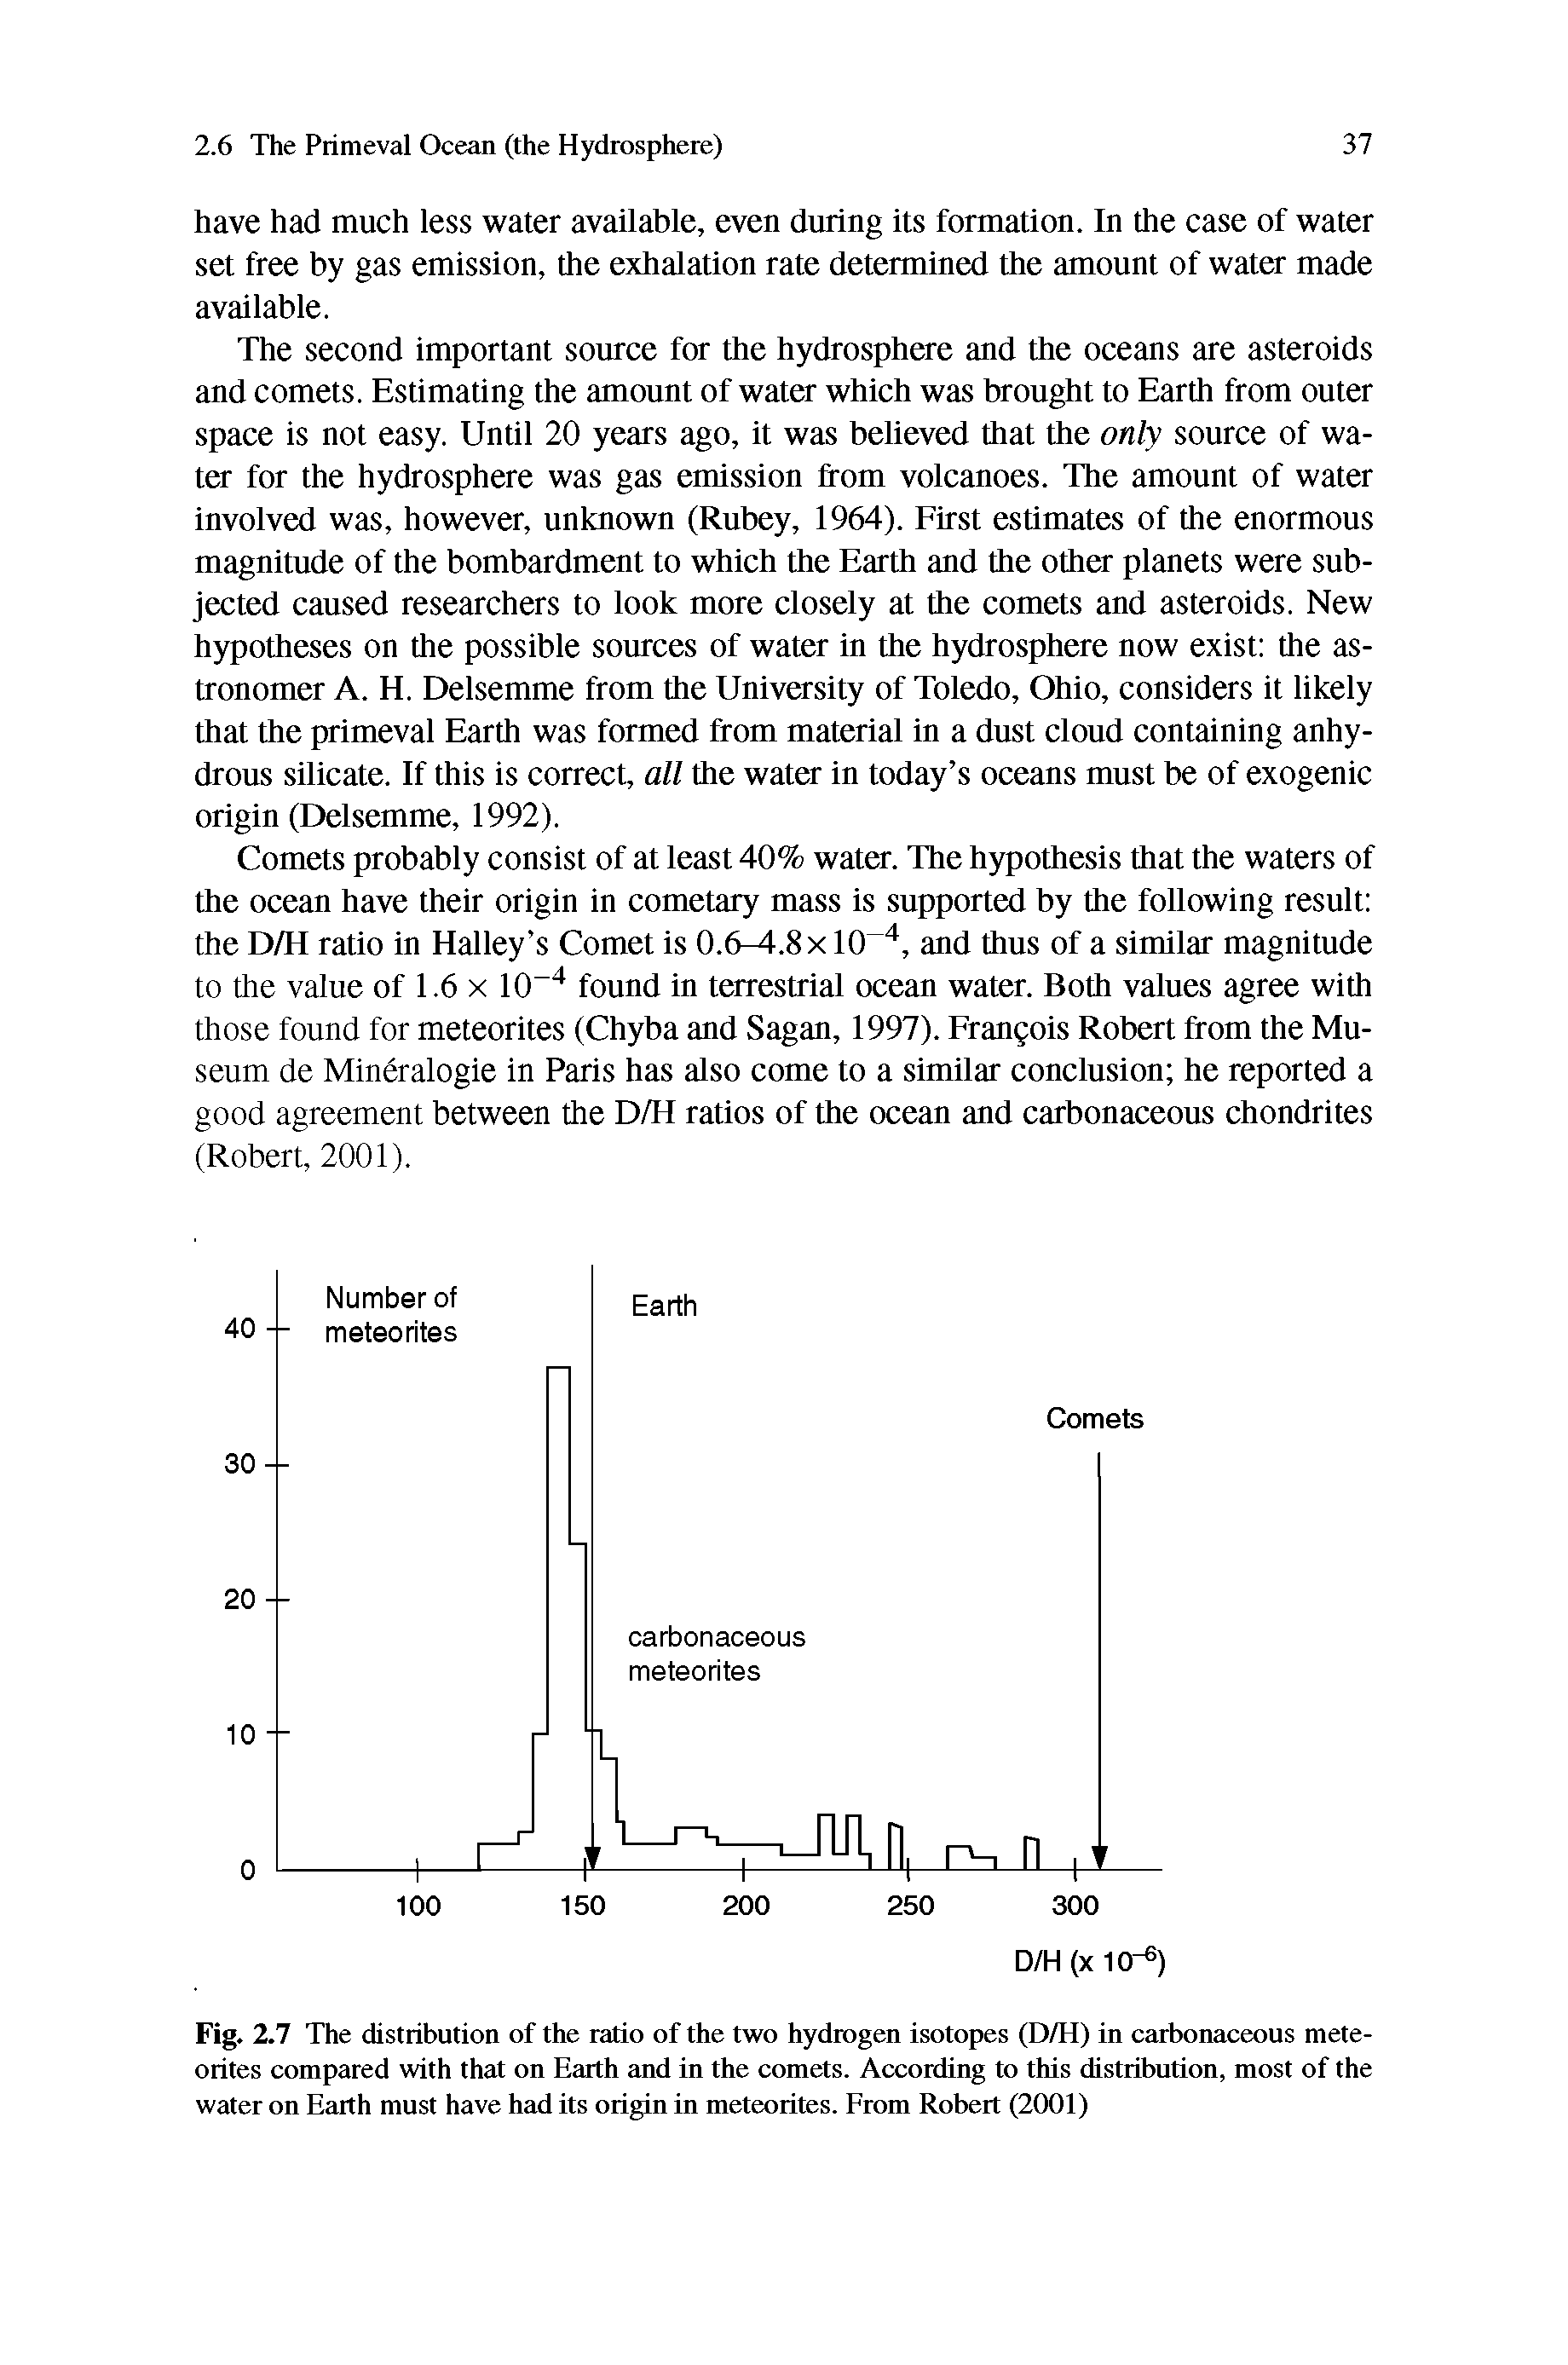 Fig. 2.7 The distribution of the ratio of the two hydrogen isotopes (D/H) in carbonaceous meteorites compared with that on Earth and in the comets. According to this distribution, most of the water on Earth must have had its origin in meteorites. From Robert (2001)...